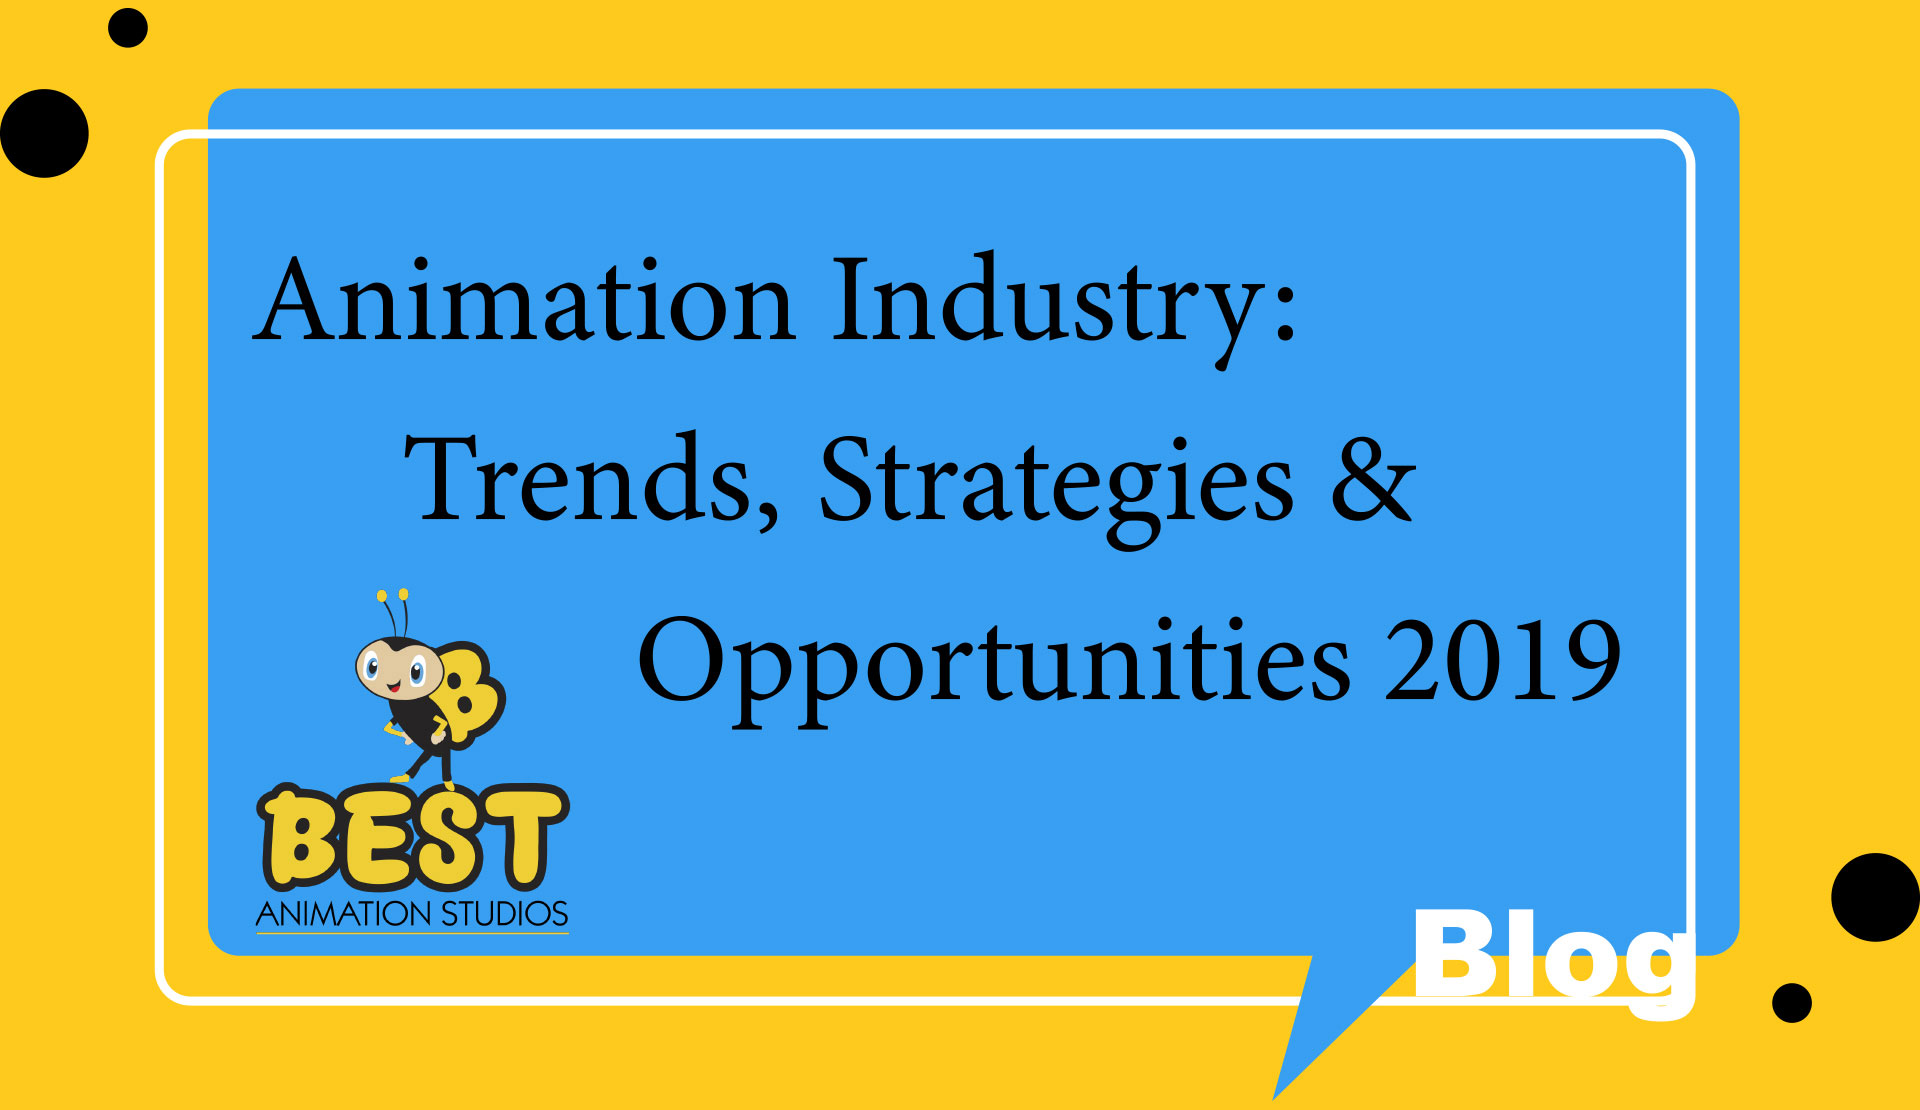 Animation Industry: Trends, Strategies & Opportunities 2019